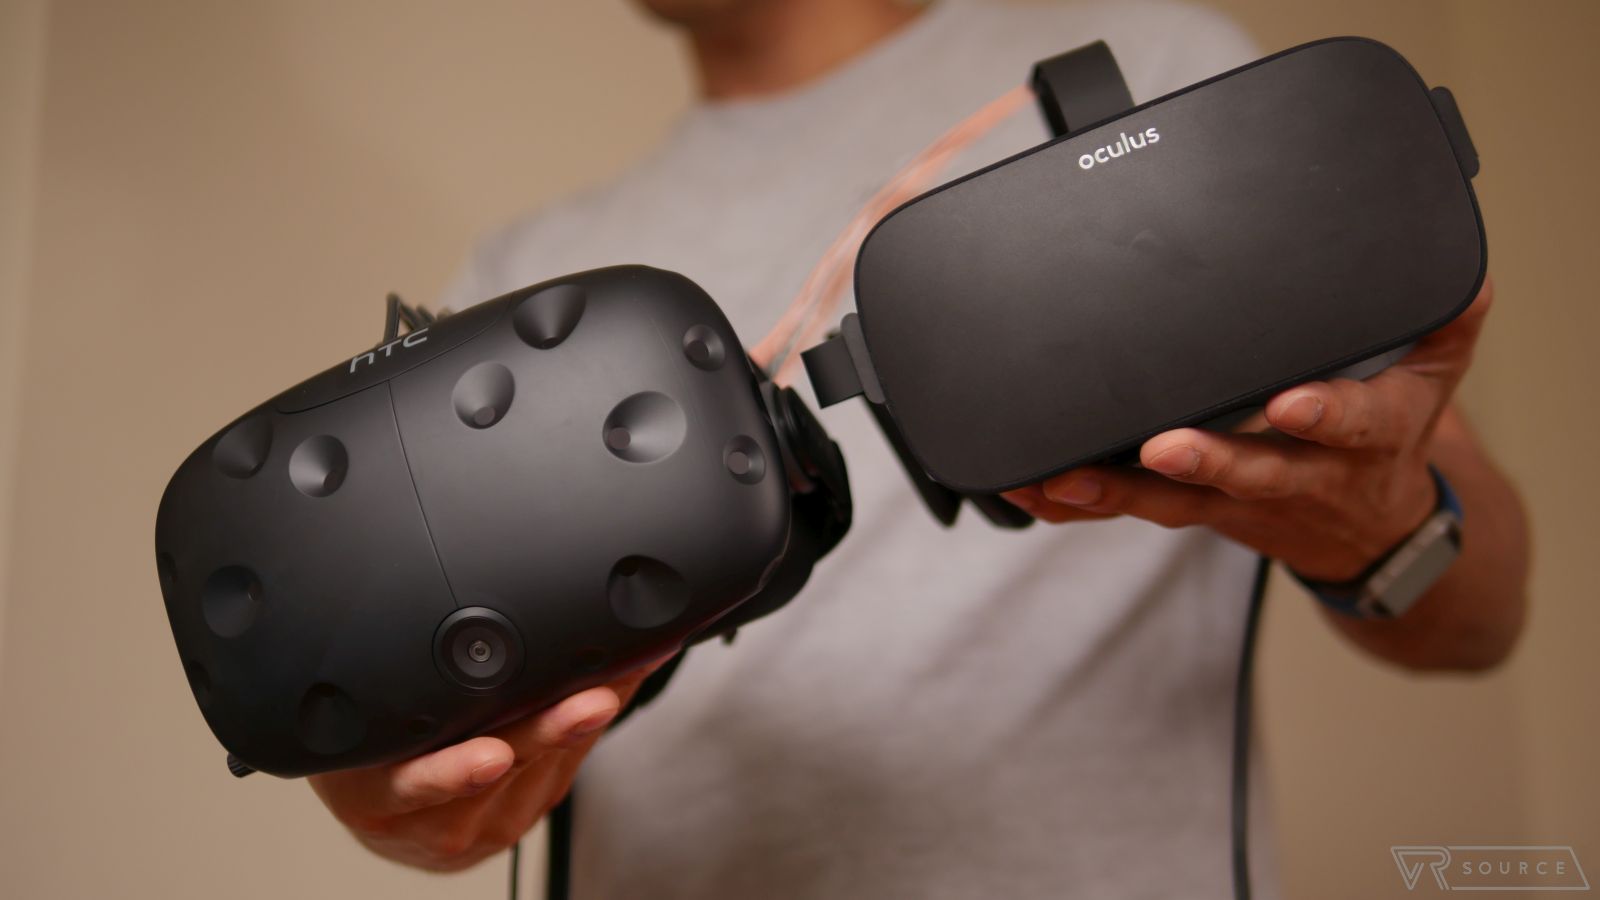 Oculus Rift Vs Htc Vive Which Is The Vr King At The Moment Vr Source